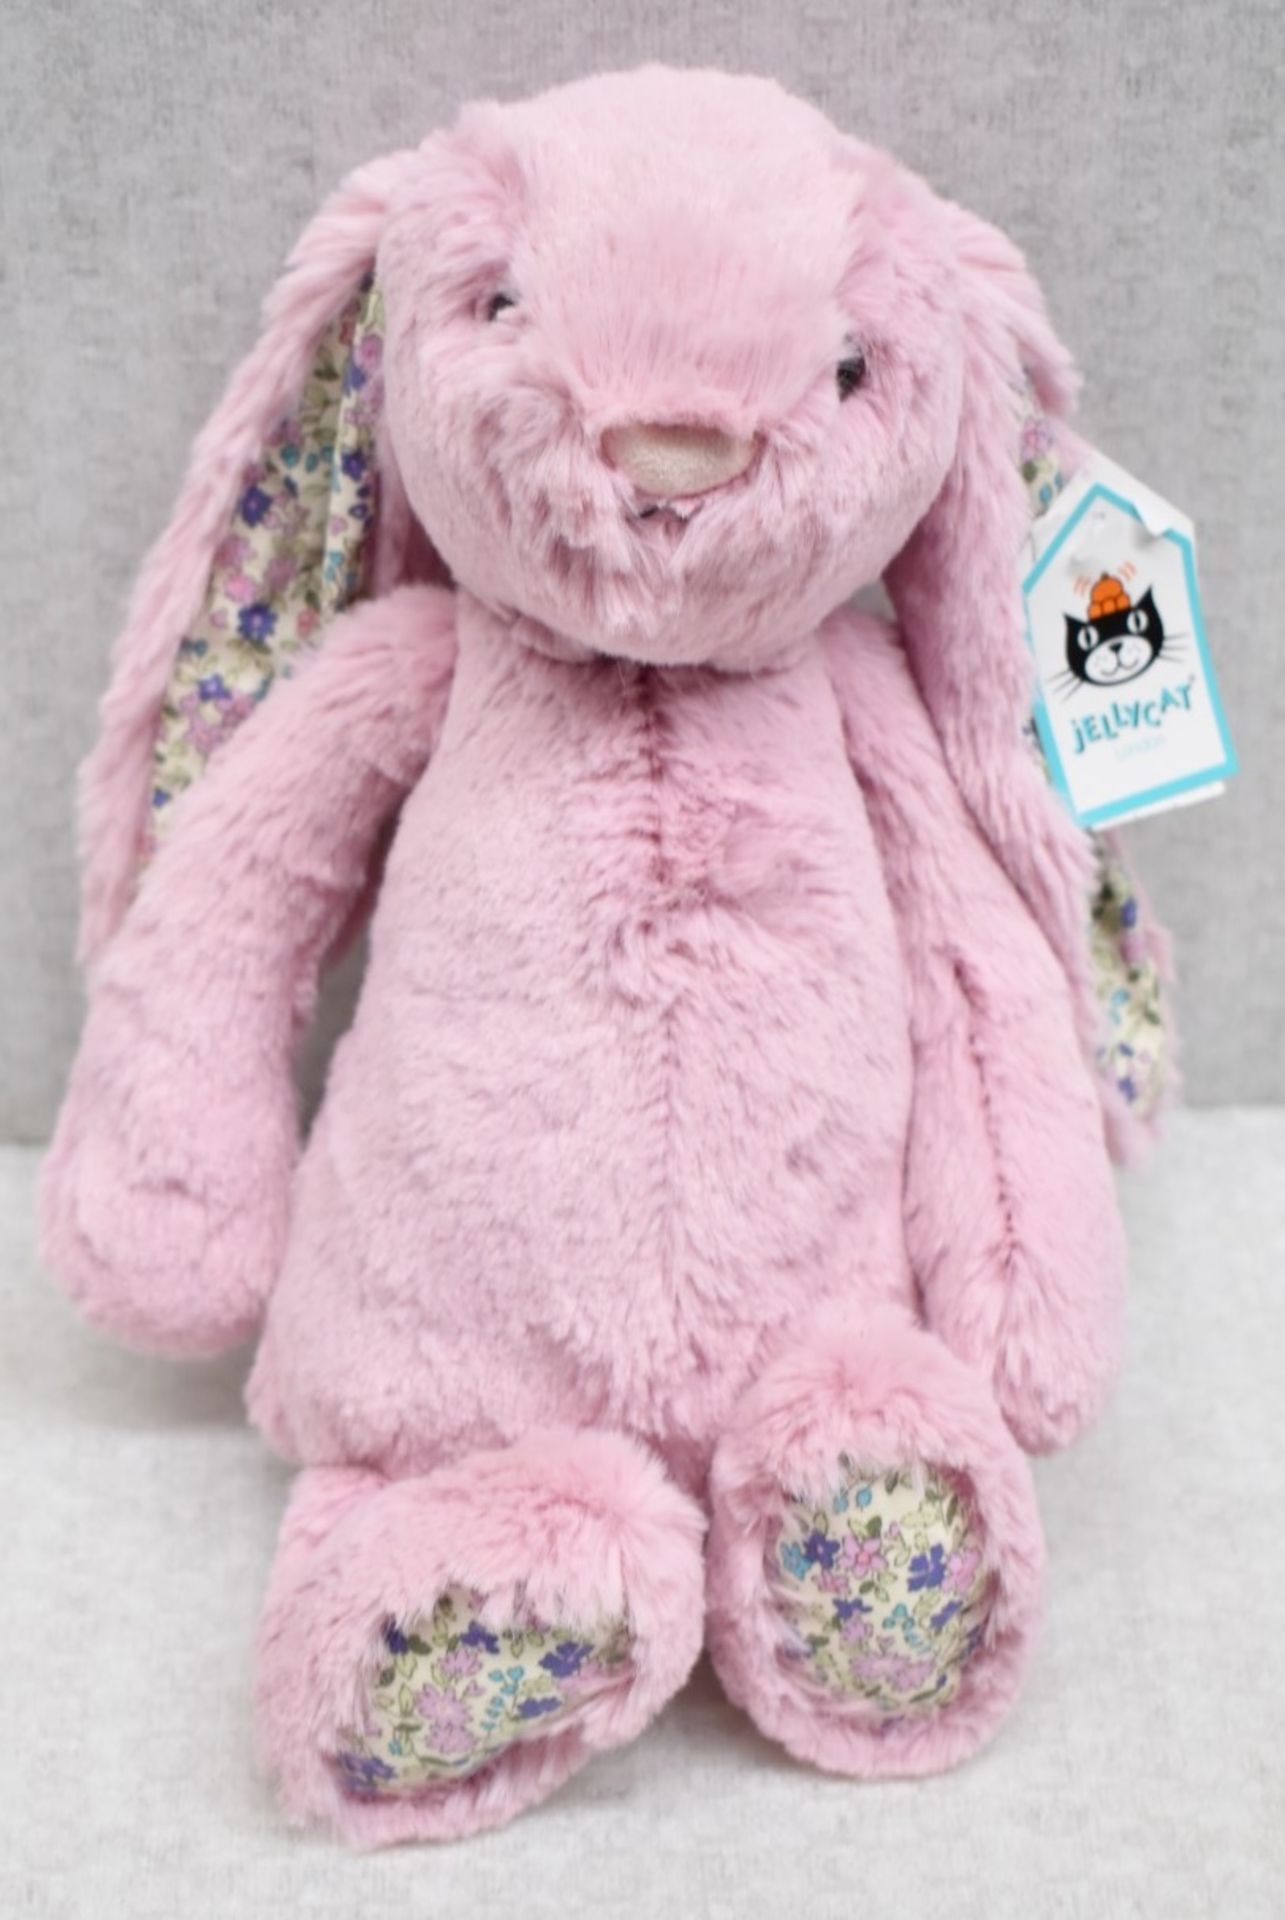 4 x Assorted JELLYCAT Plush Toys, Includes Panda, Easter Bunny and 2 x Rabbits - TOTAL RRP £90.